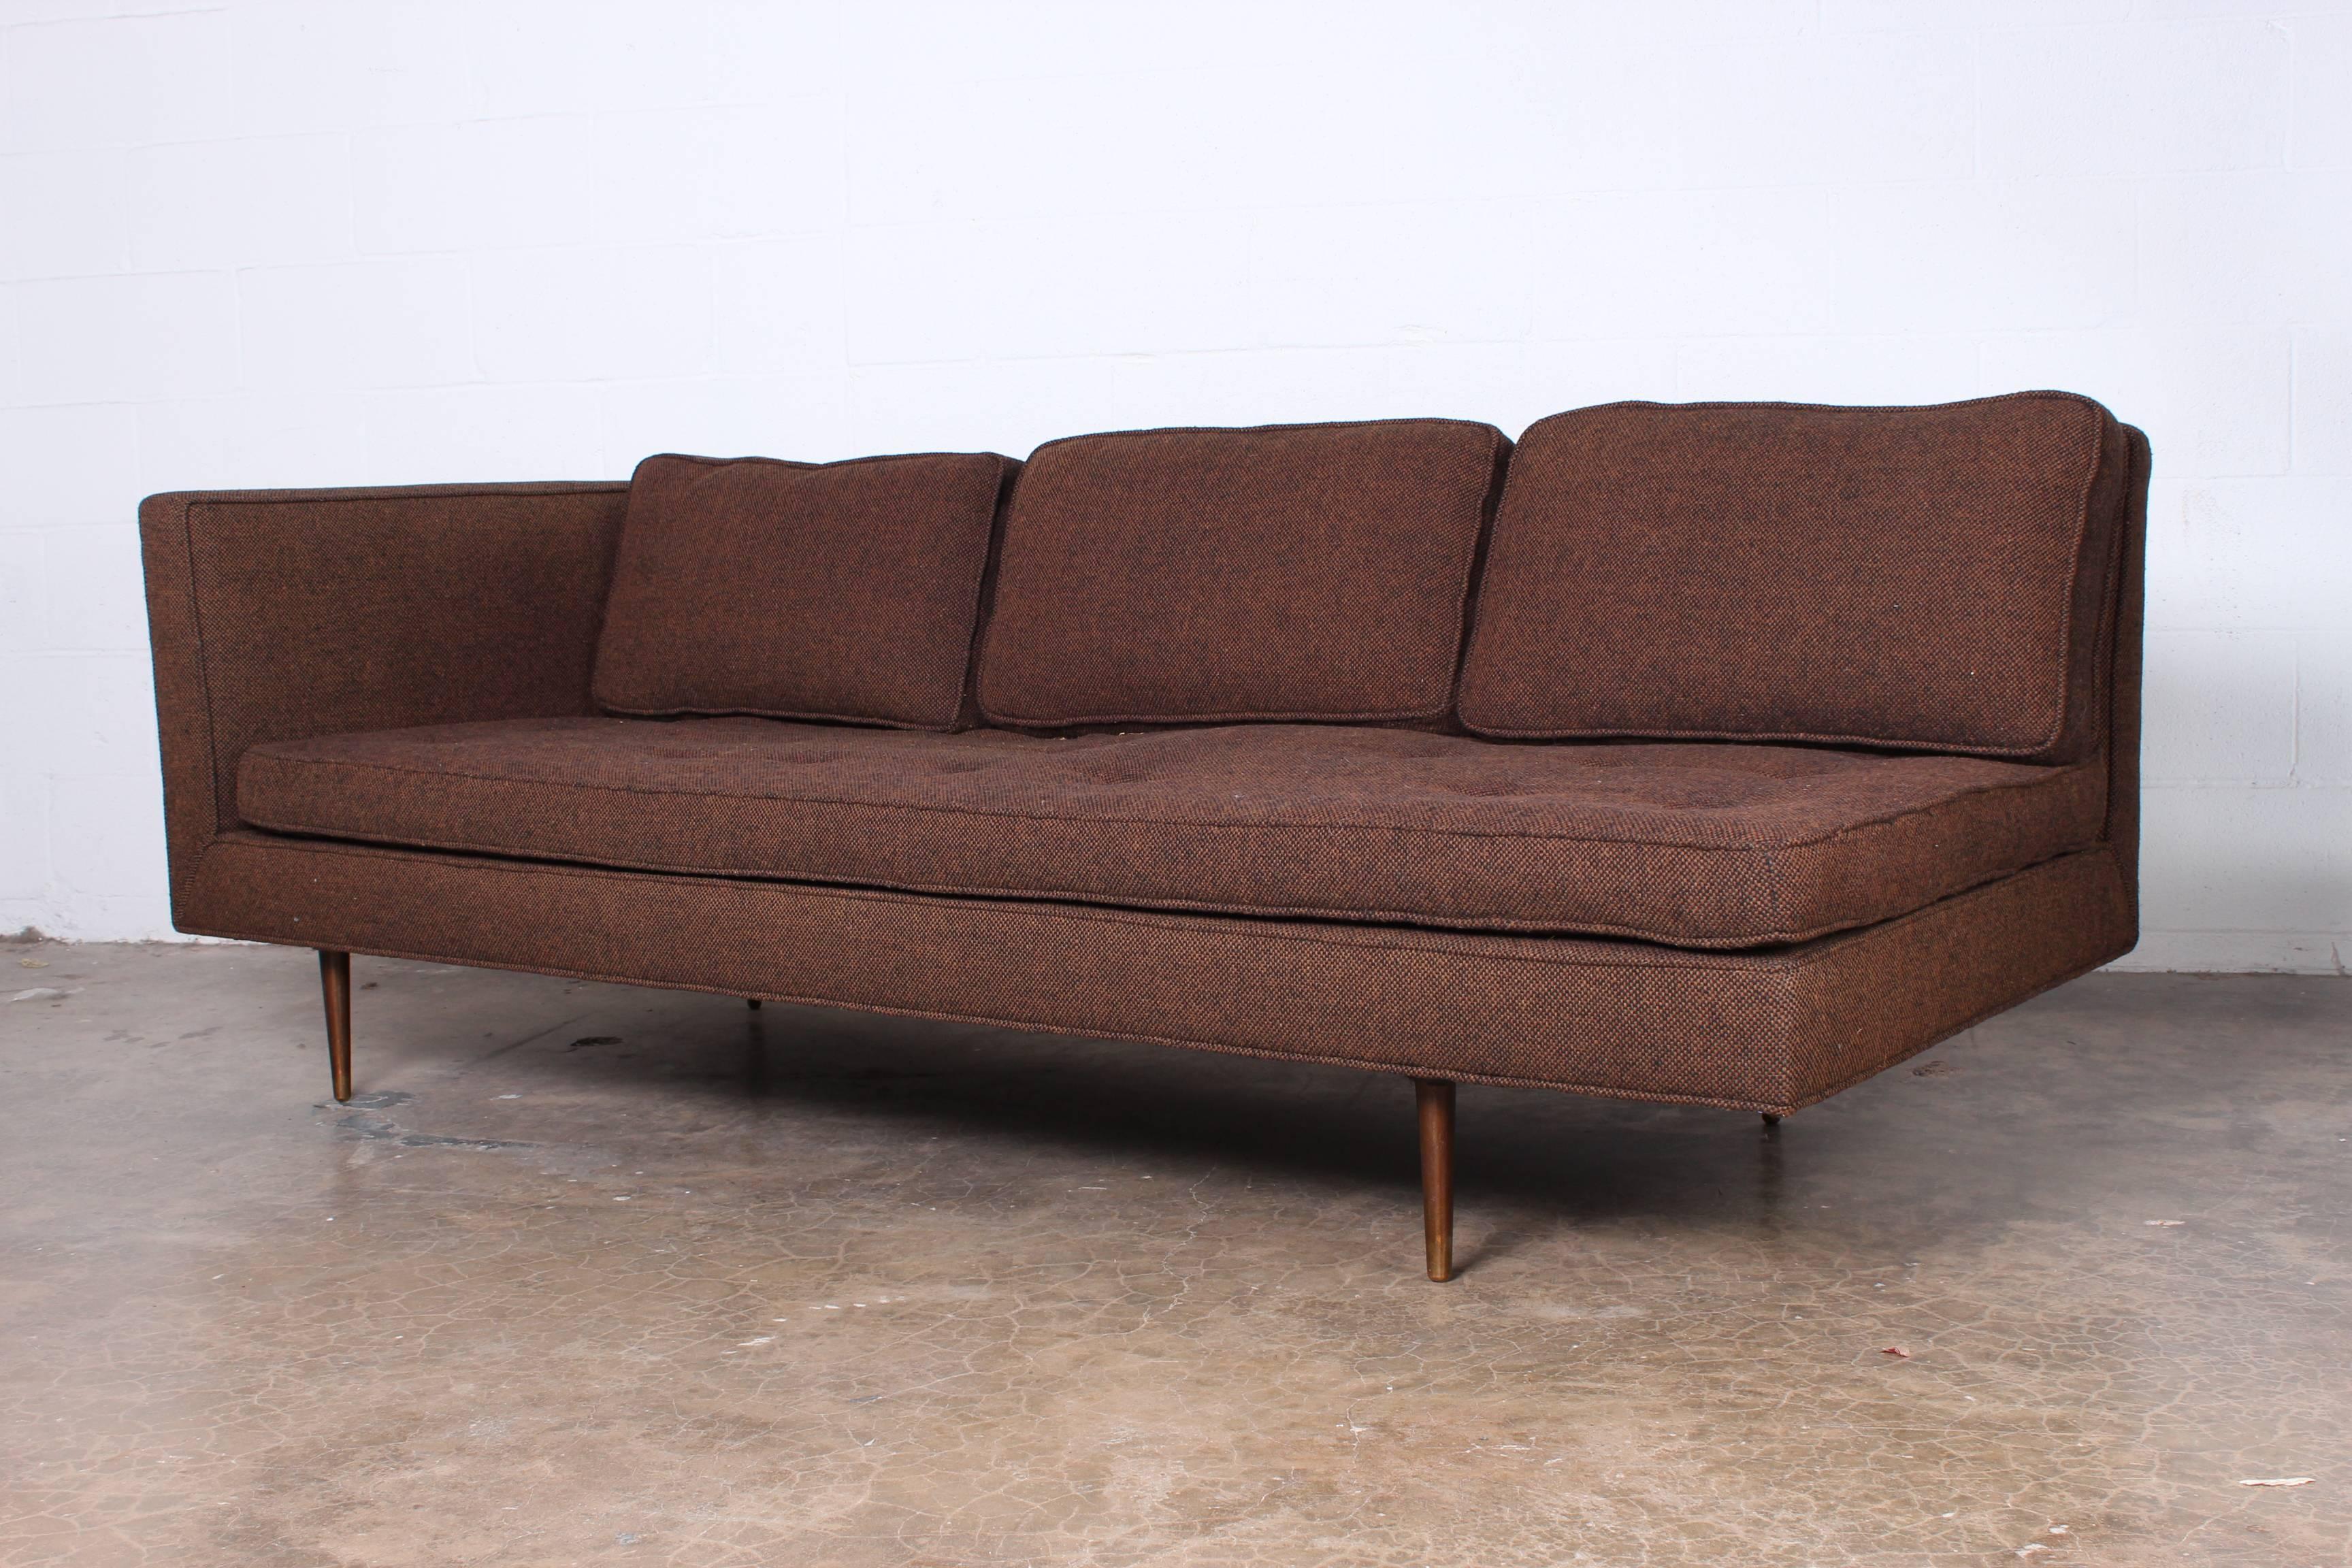 Mid-20th Century Sofa/Chaise by Edward Wormley for Dunbar For Sale